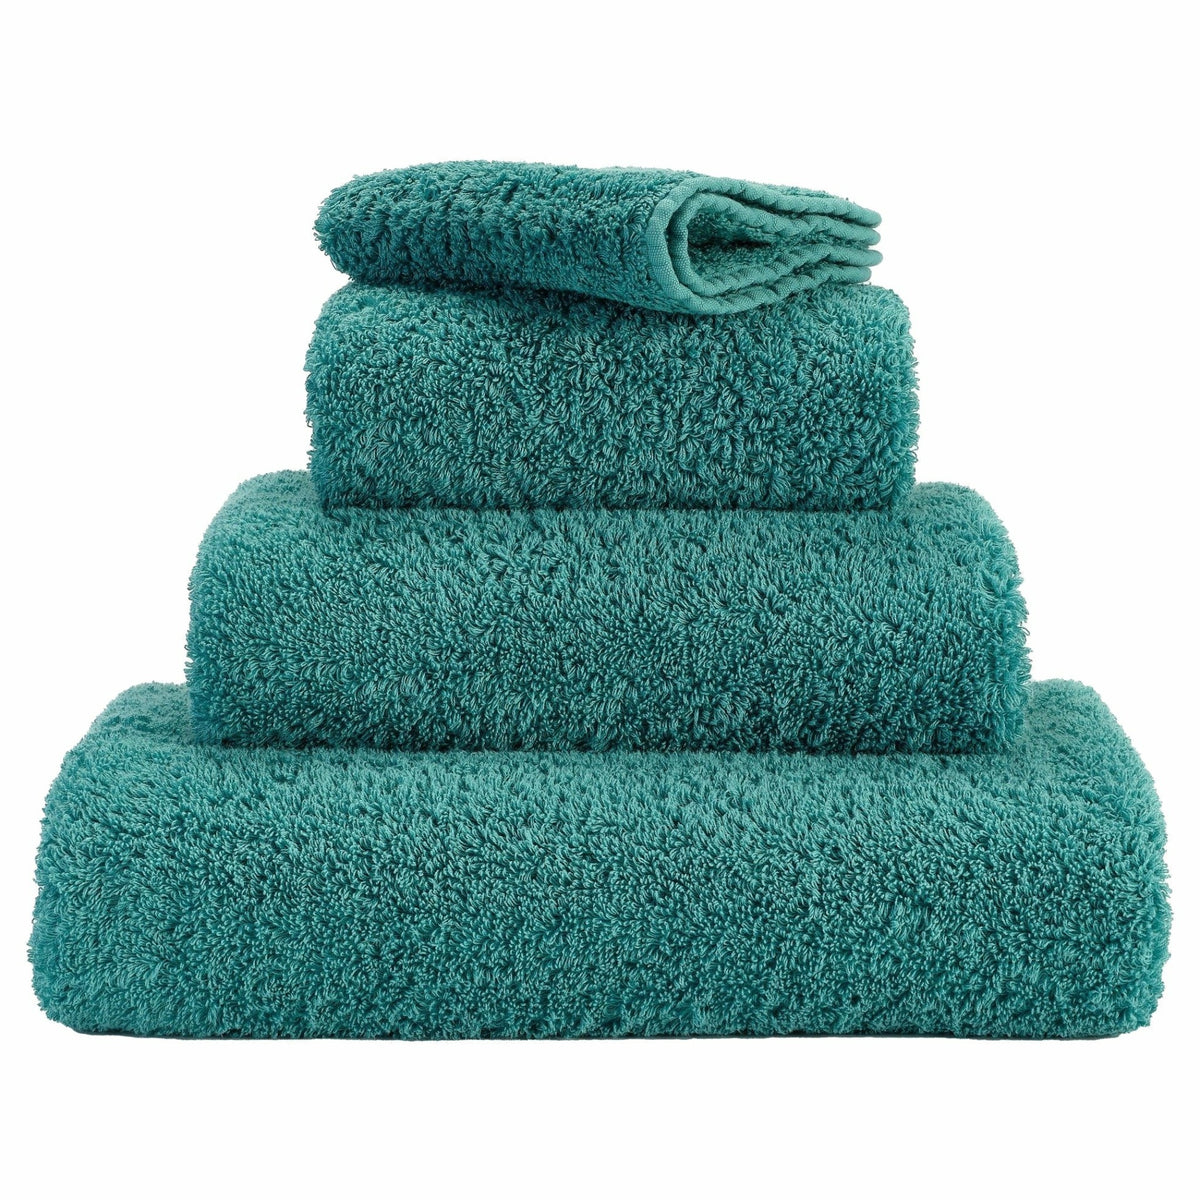 Abyss Super Pile Bath Towels Dragonfly Fine Linens